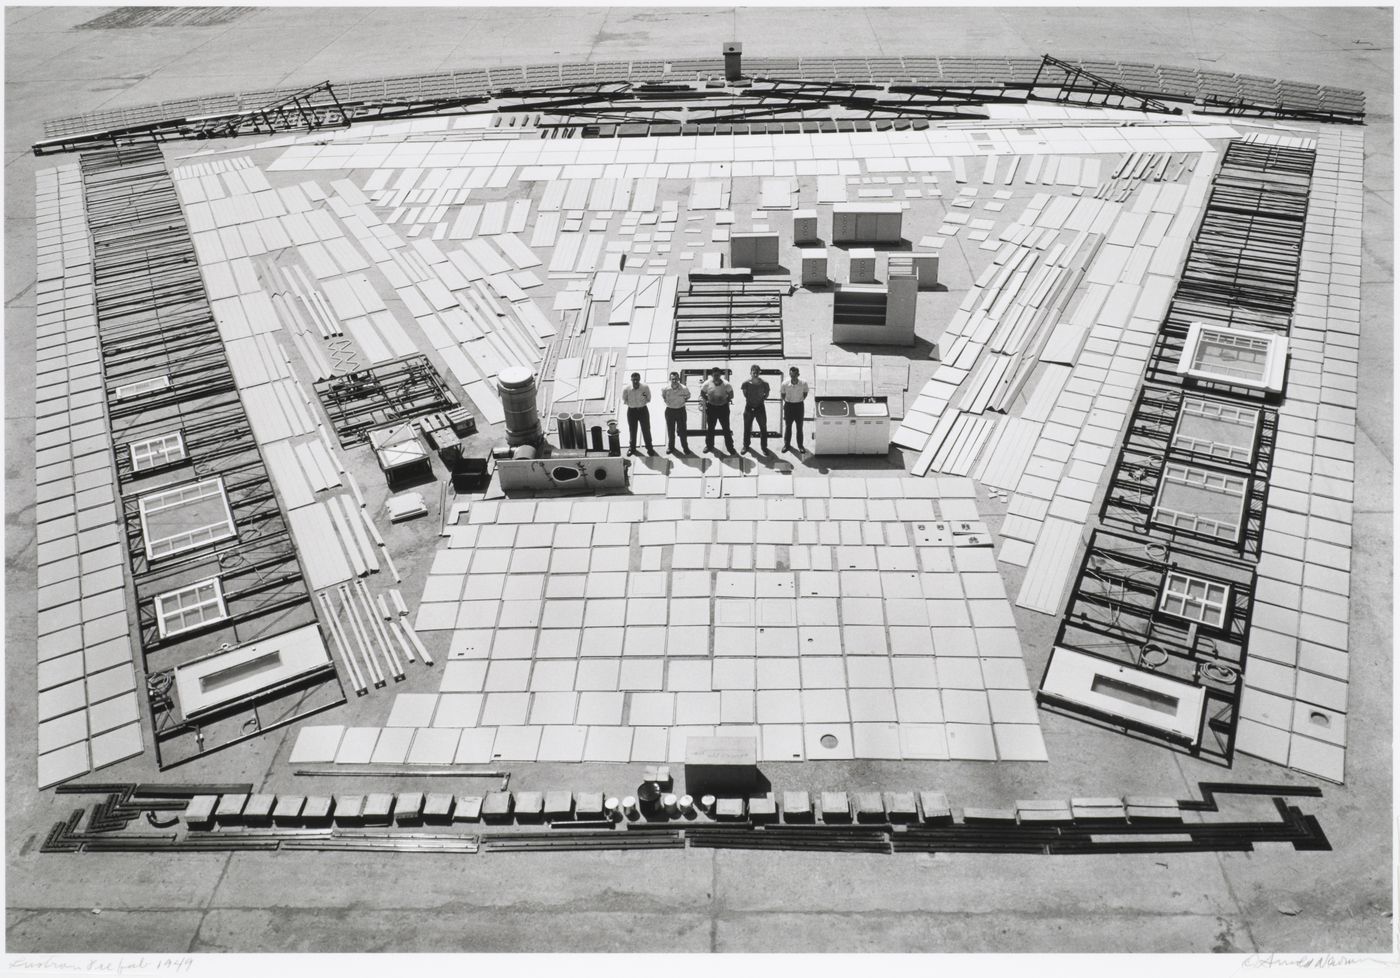 Group portrait of workmen standing admidst prefabricated parts of a Lustron house layed-out for construction, Columbus, Ohio, United States